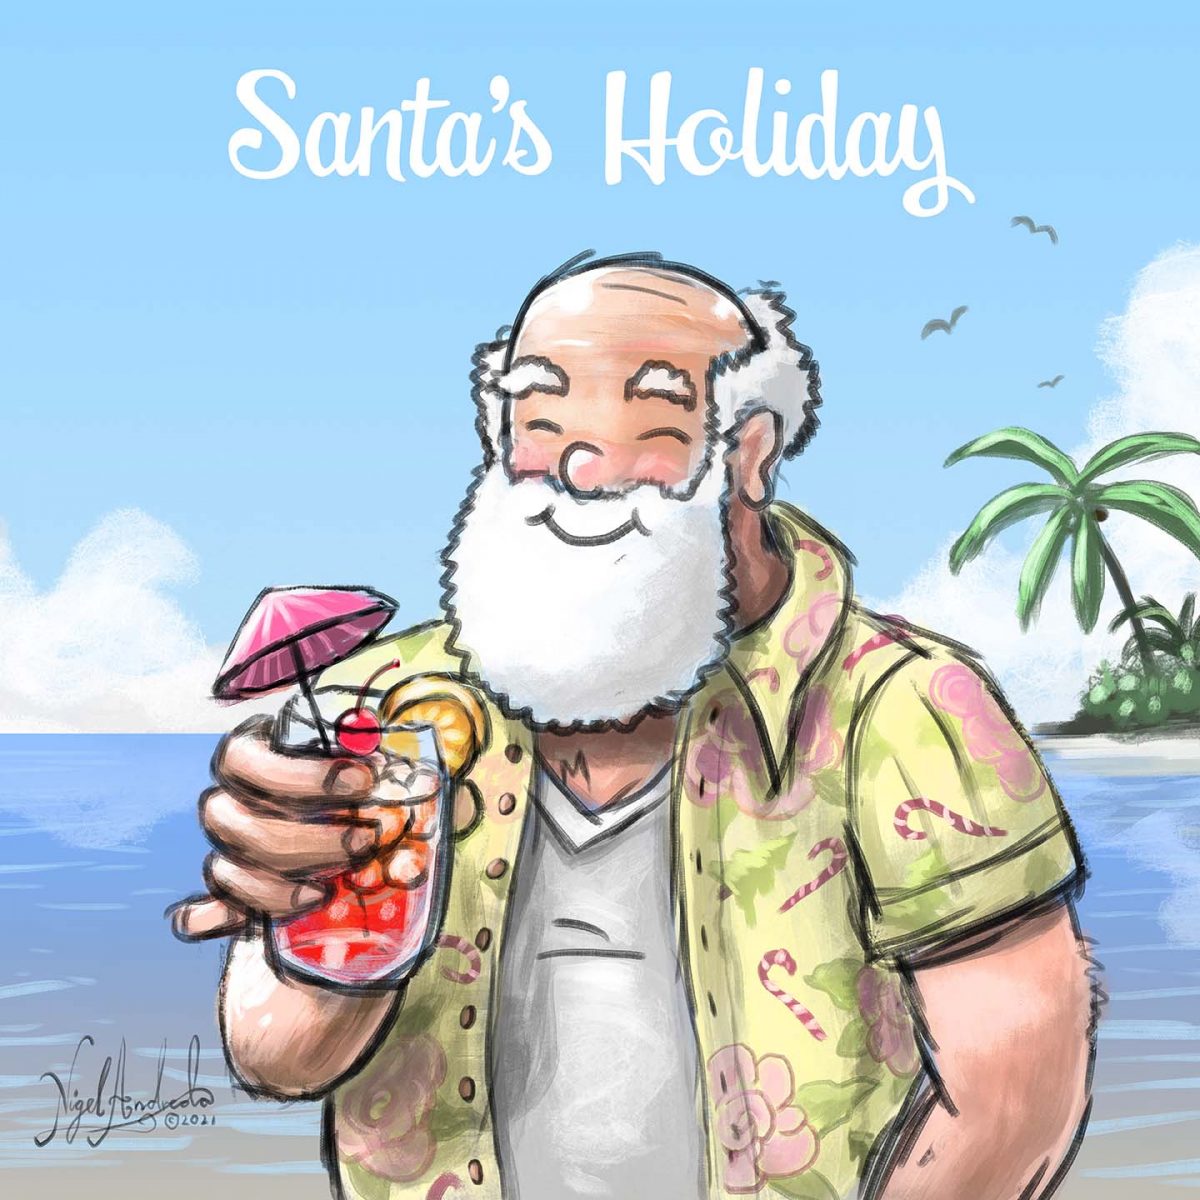 Santa's Holiday by Nigel Andreola - Santa on a tropical beach holding a Shirley Temple drink